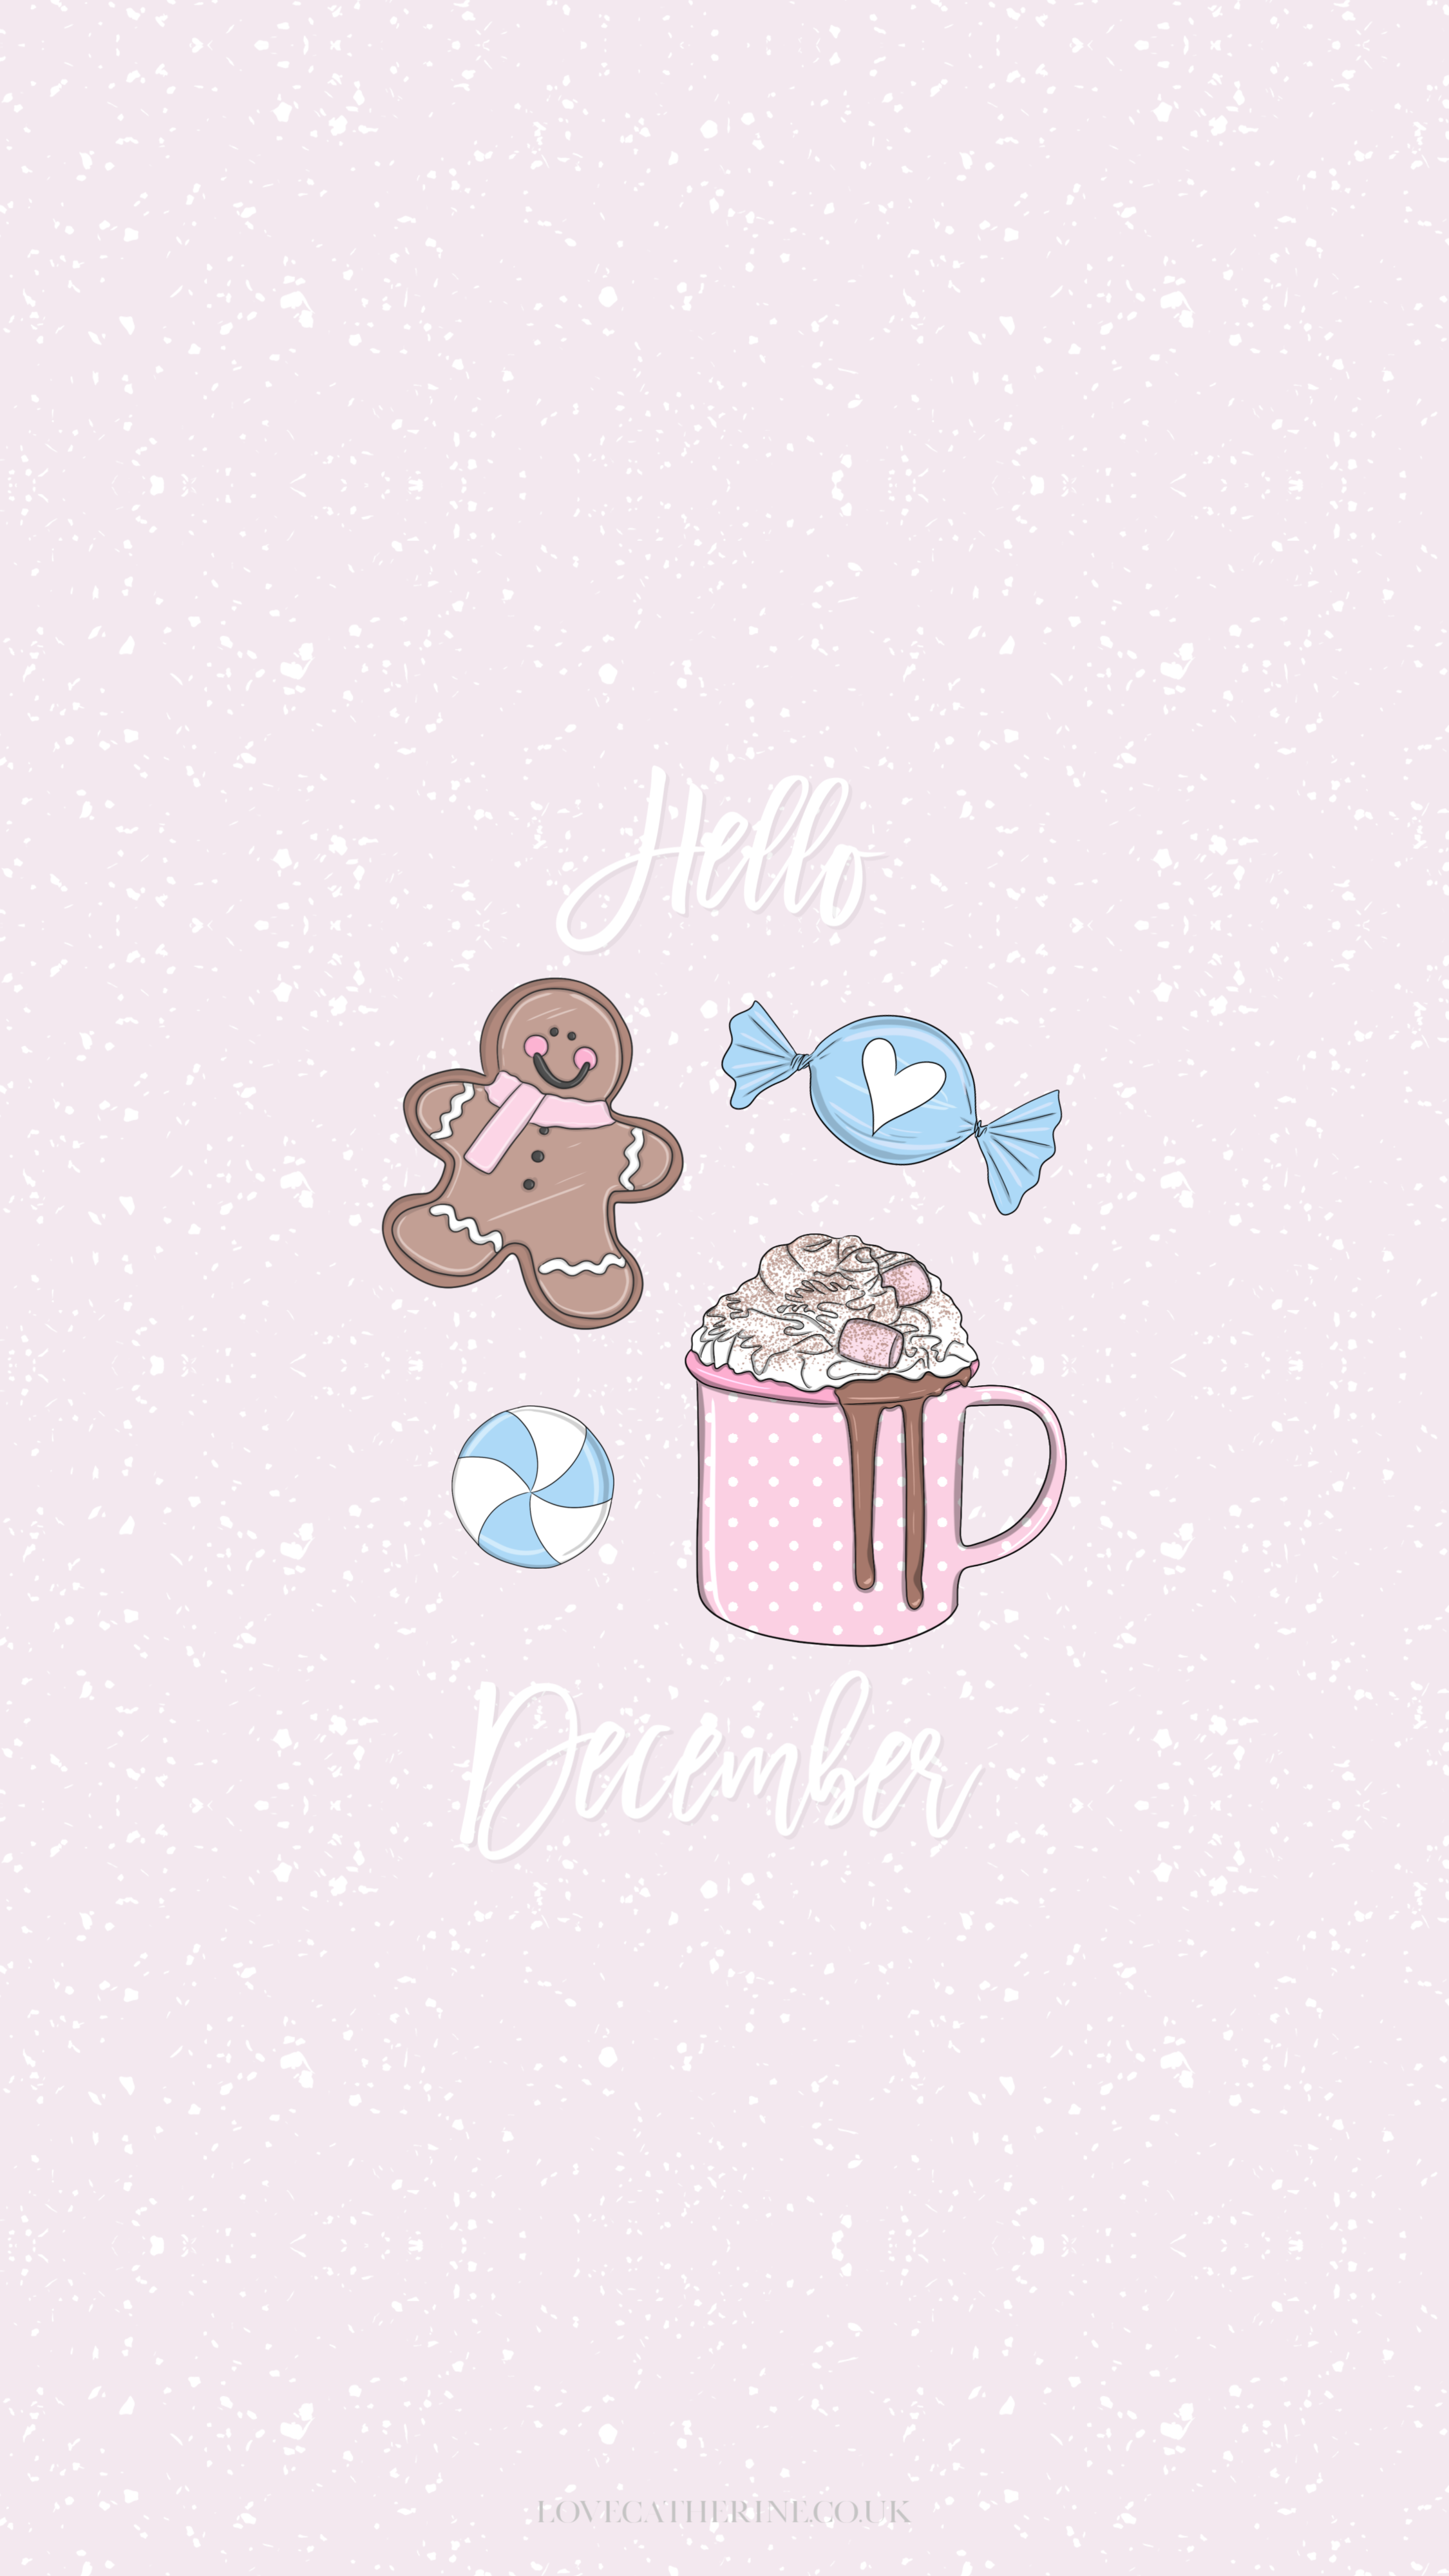 Free Cute & Girly Winter Phone Wallpaper For Christmas. Wallpaper iphone christmas, Christmas phone wallpaper, Christmas wallpaper